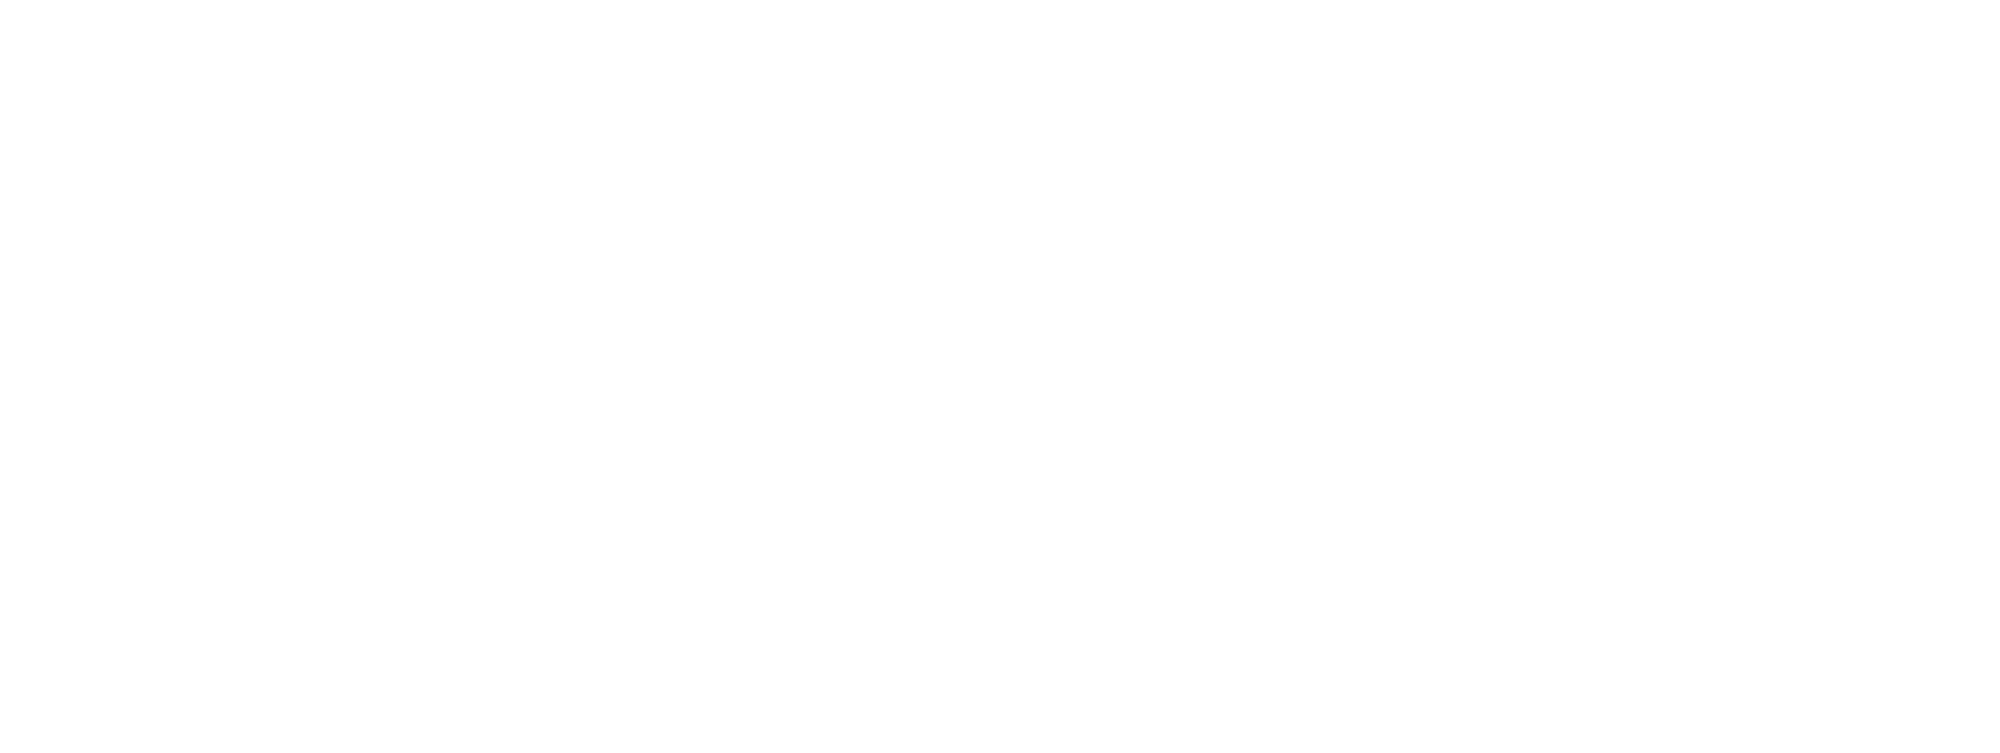 One Thousand Voices